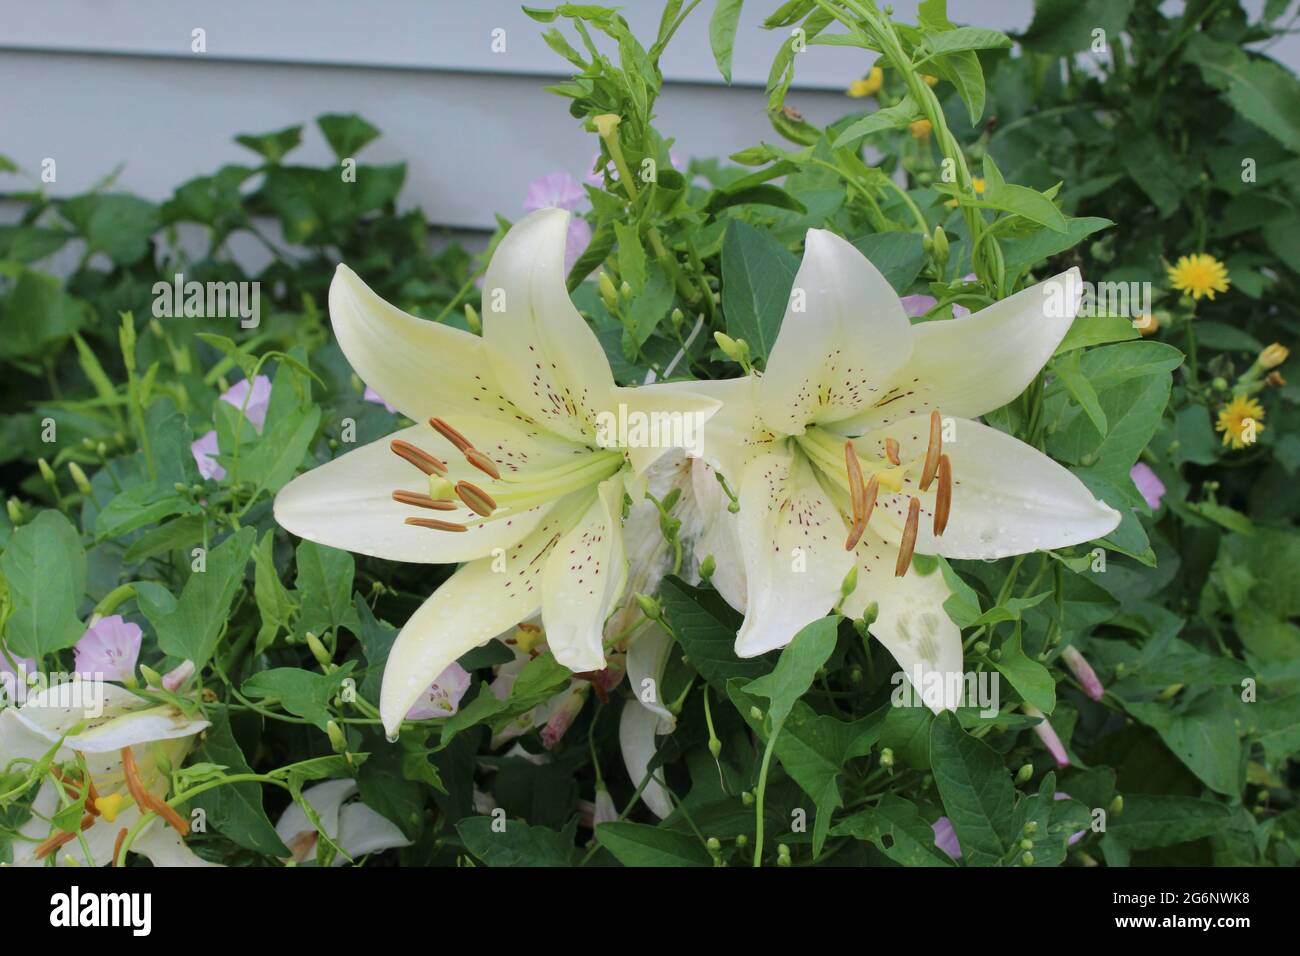 Lilies in bloom Stock Photo